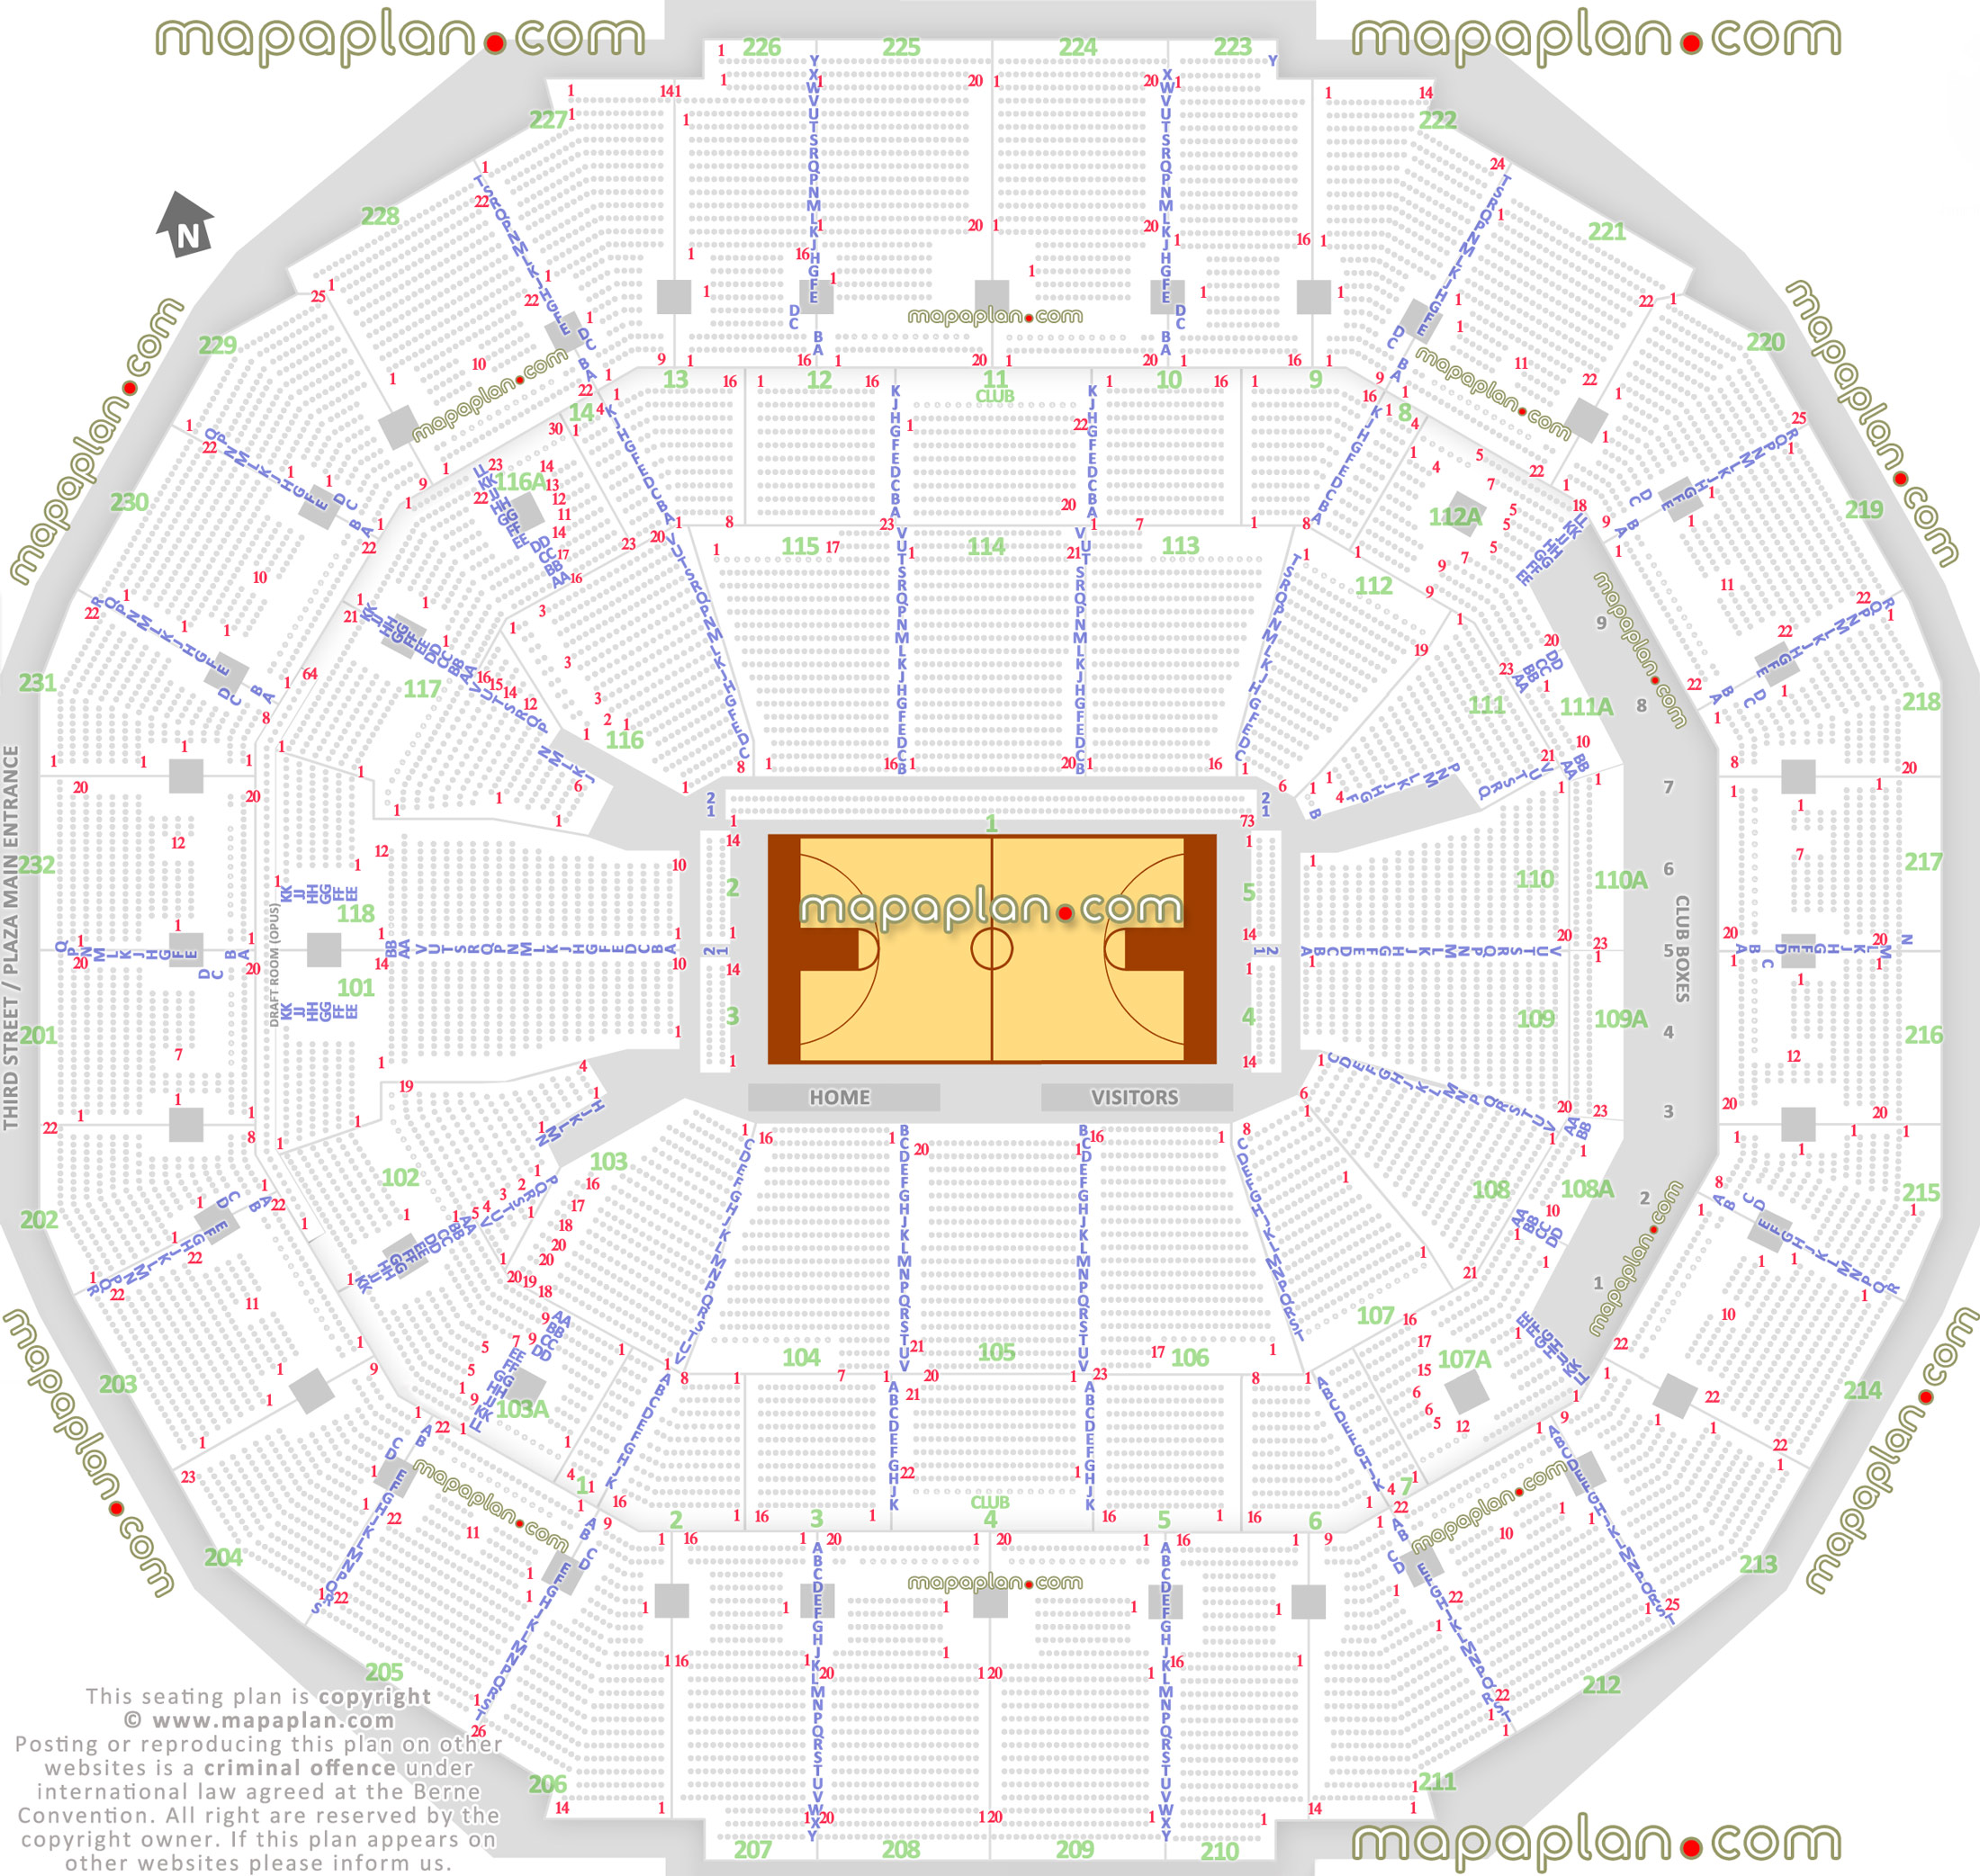 basketball plan memphis grizzlies nba tigers ncaa games arena stadium diagram individual find seat locator seats row seats numbered plaza courtside sections 101 102 103 103a 104 105 106 107 107a 108 108a 109 109a 110 110a 111 111a 112 112a 113 114 115 116 116a 117 118 Memphis FedExForum seating chart